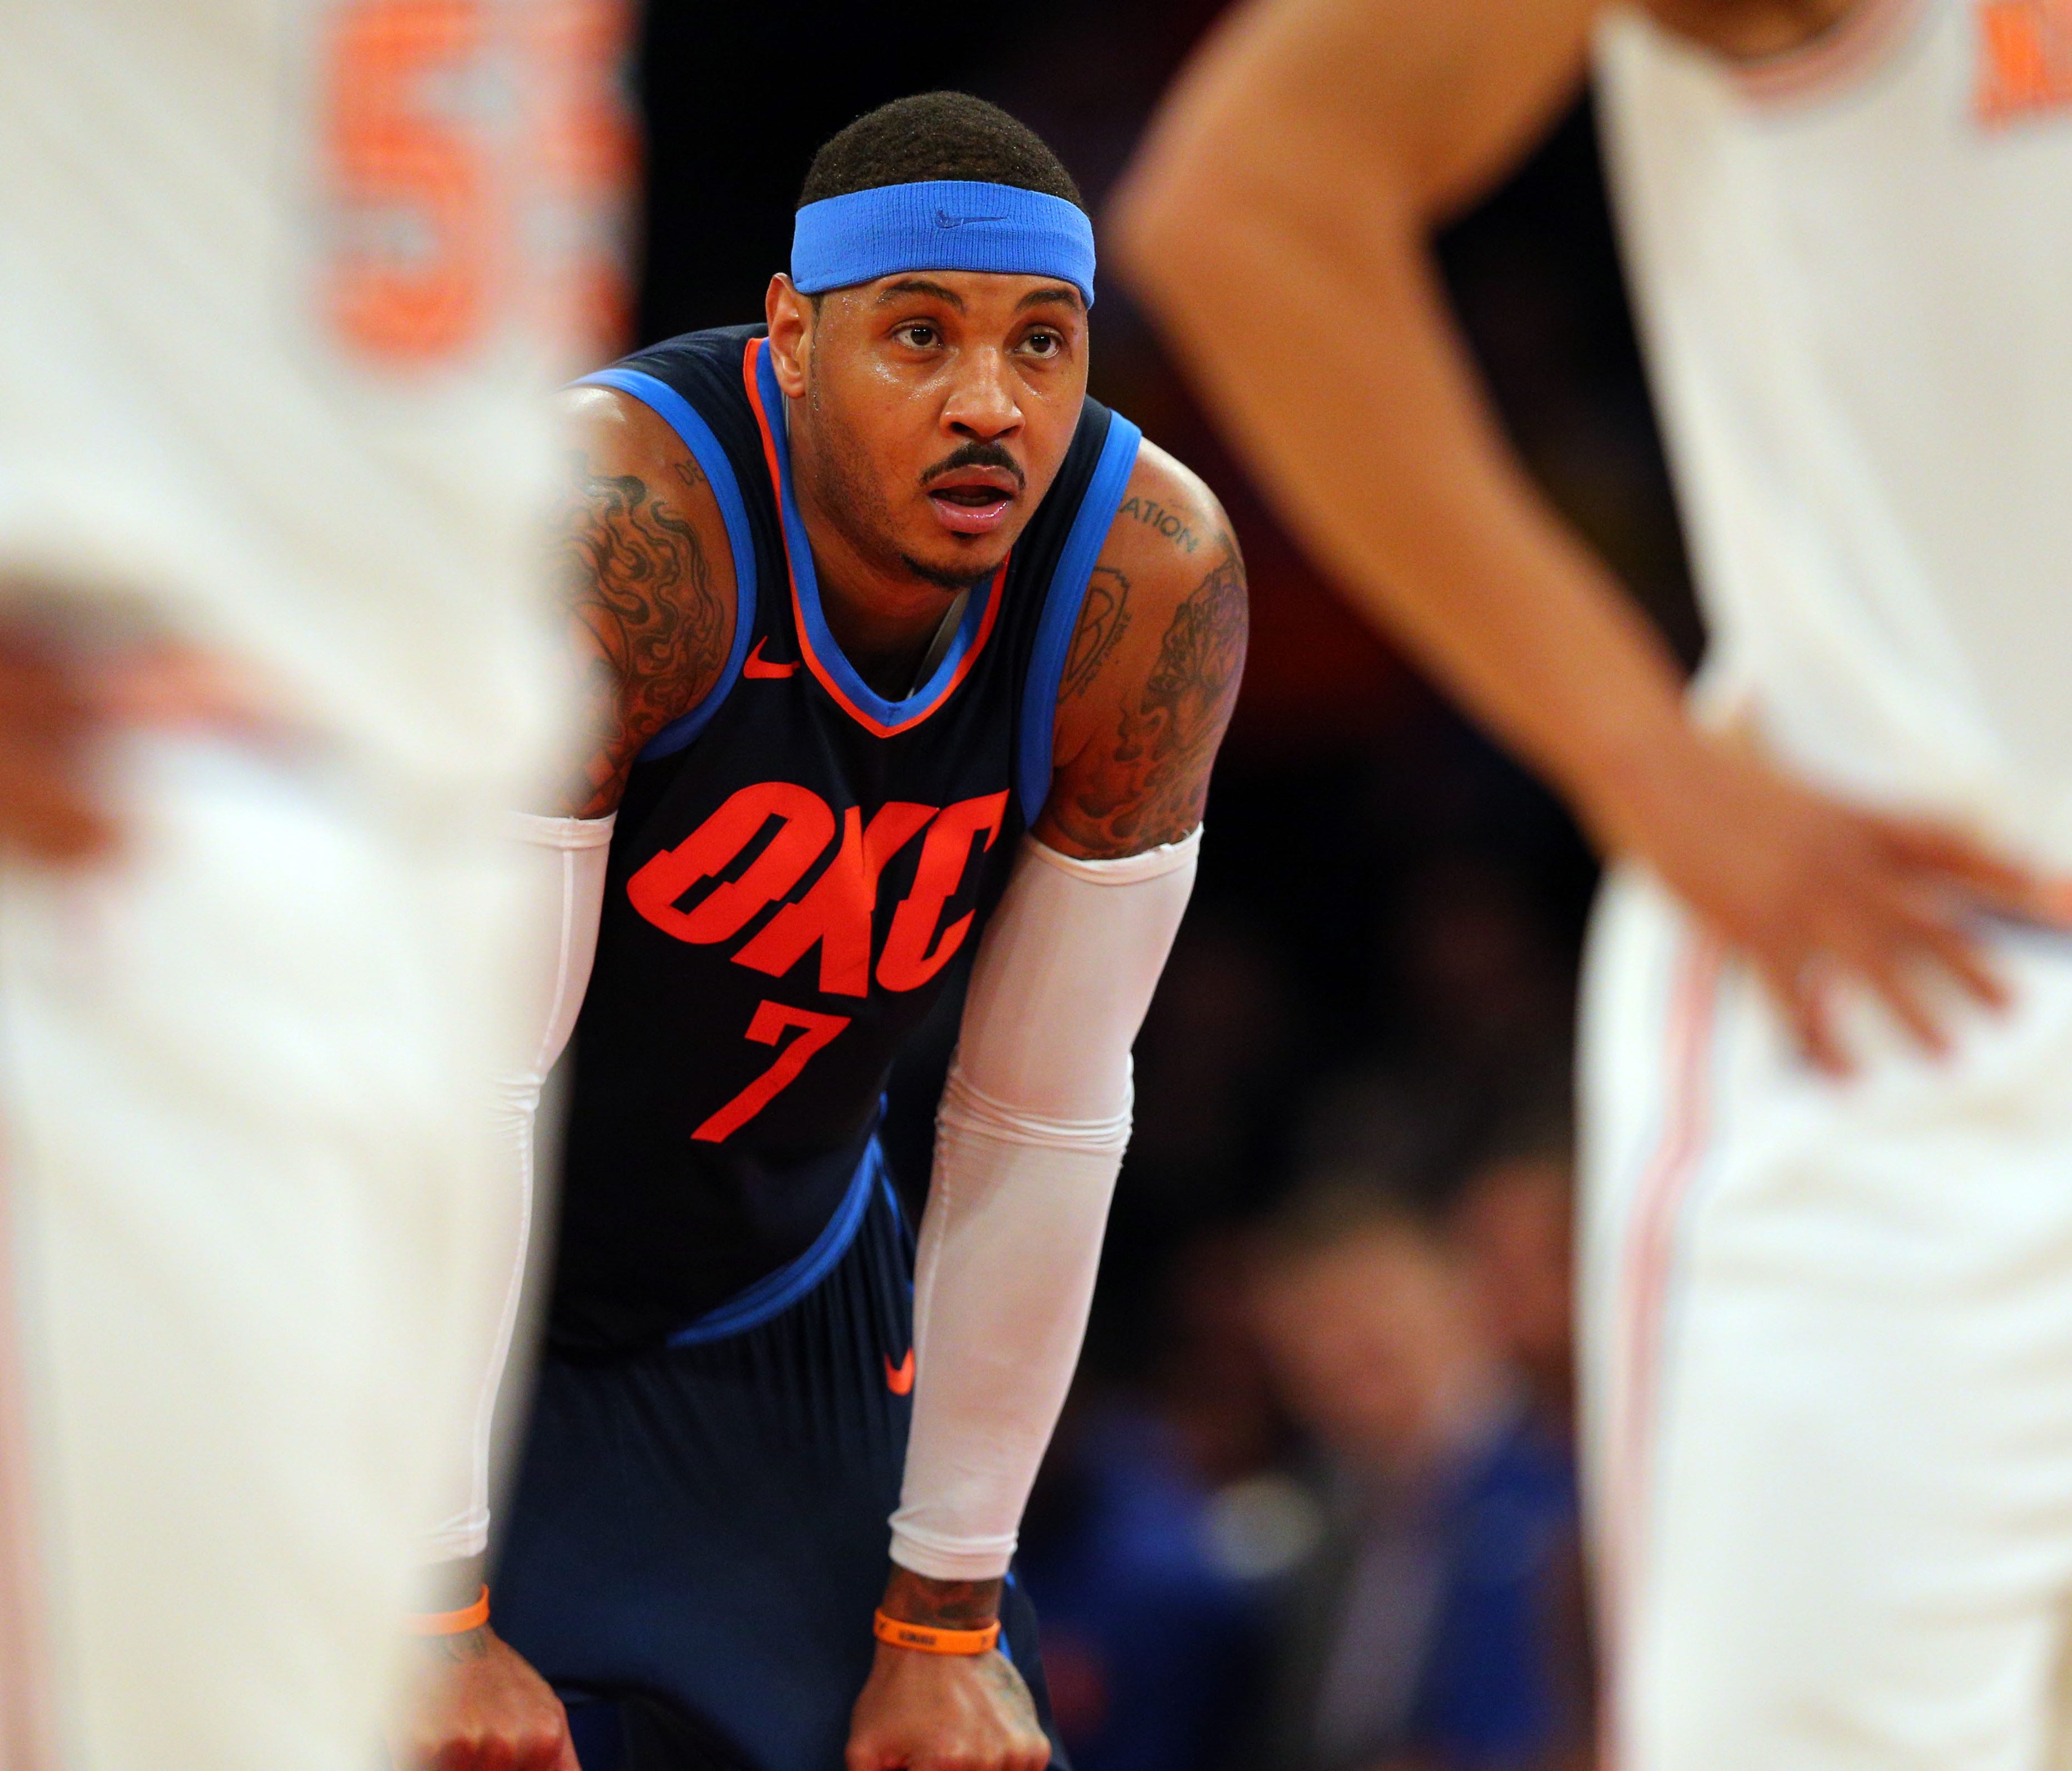 Carmelo Anthony looks on during the second quarter against the New York Knicks at Madison Square Garden.